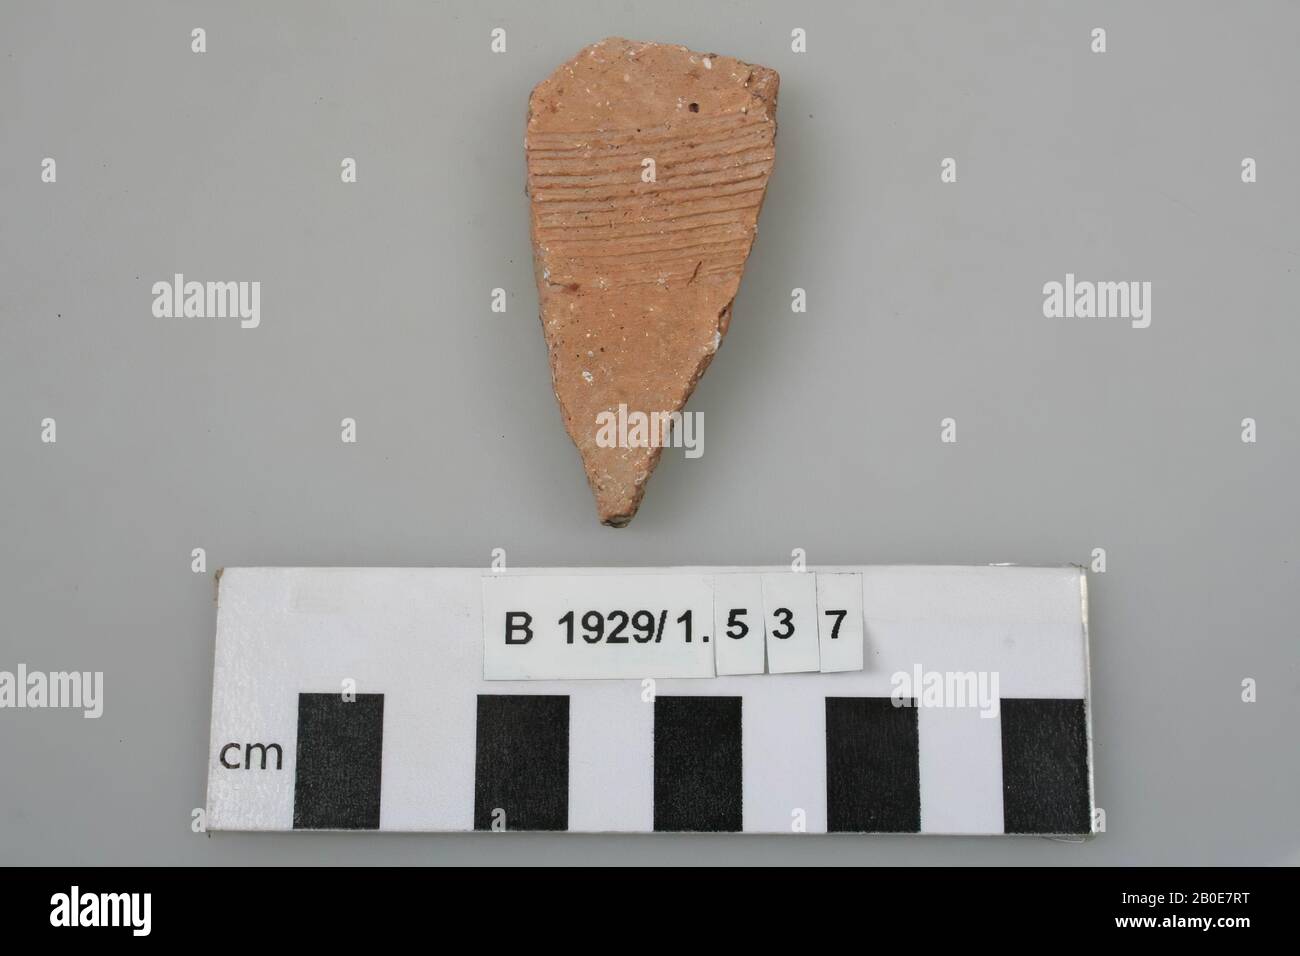 A wall shard with comb decoration, crockery, earthenware, L 6 cm, Palestine Stock Photo